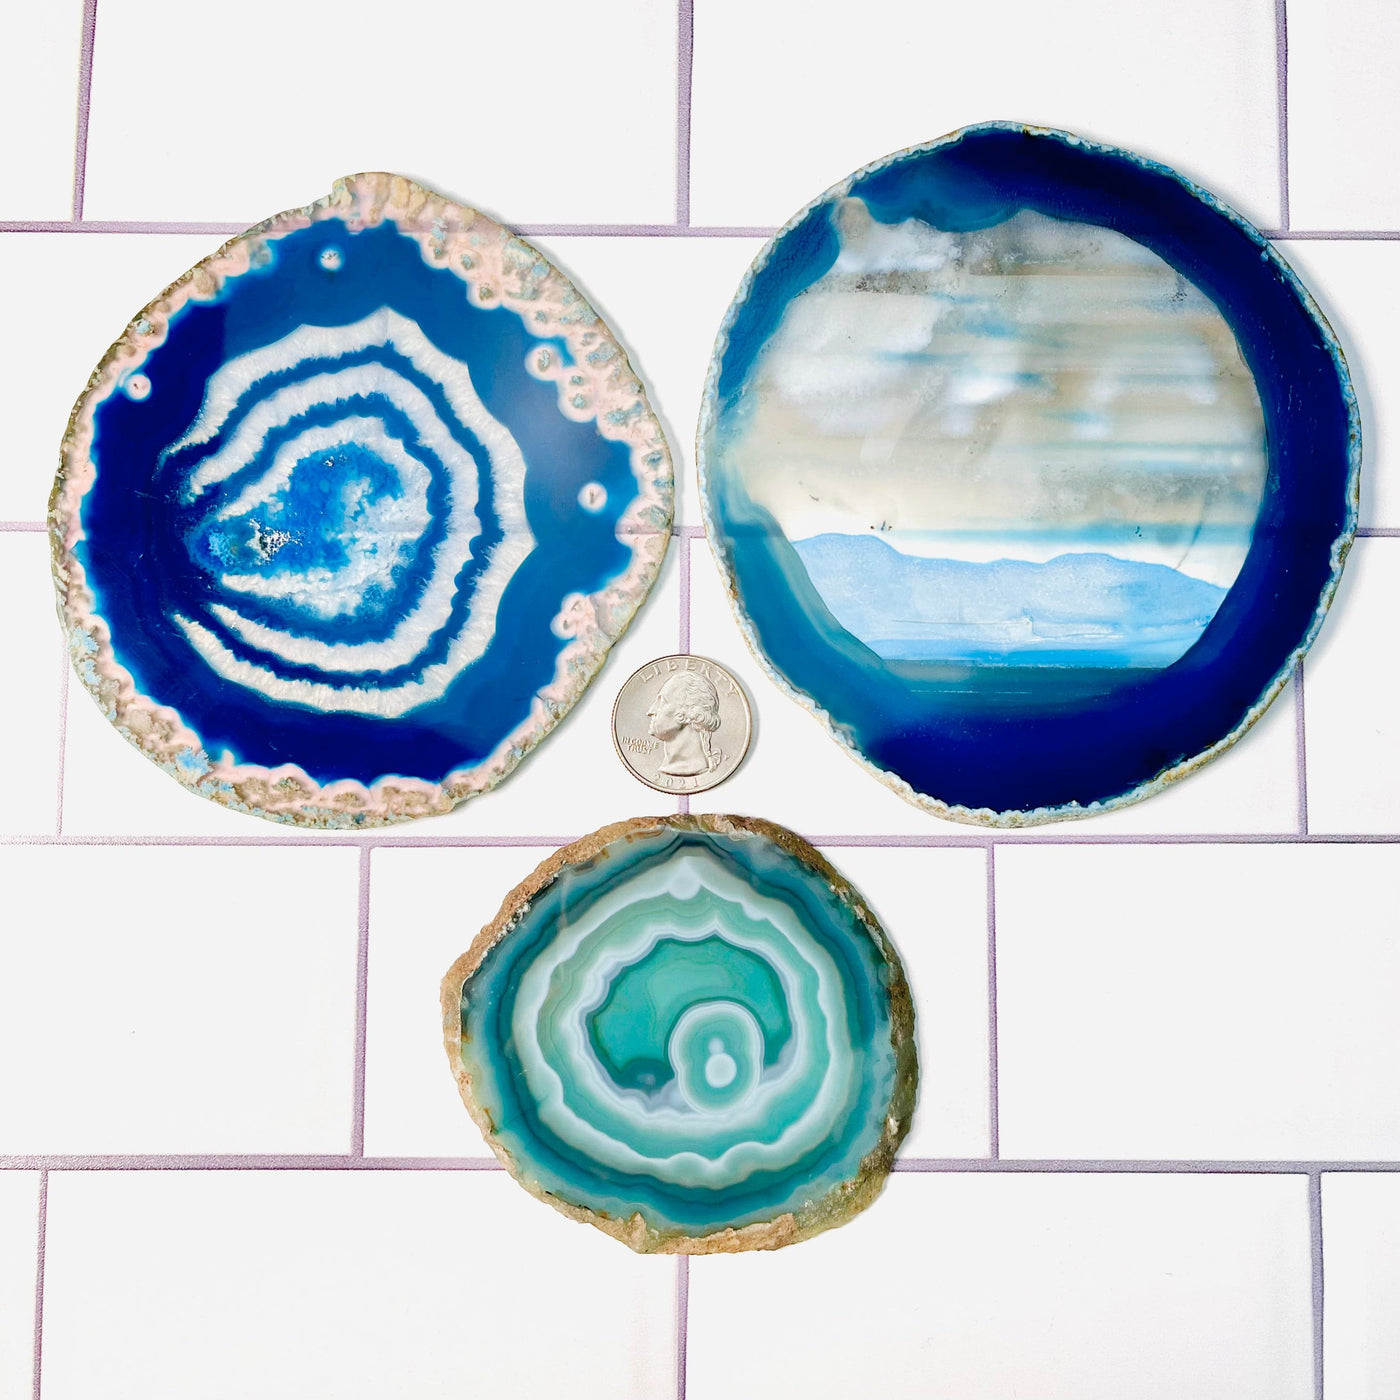 Set of 3 Agate Slices - Dyed Blue and Green, displayed on a tile surface. A quarter placed next to them as a size reference.